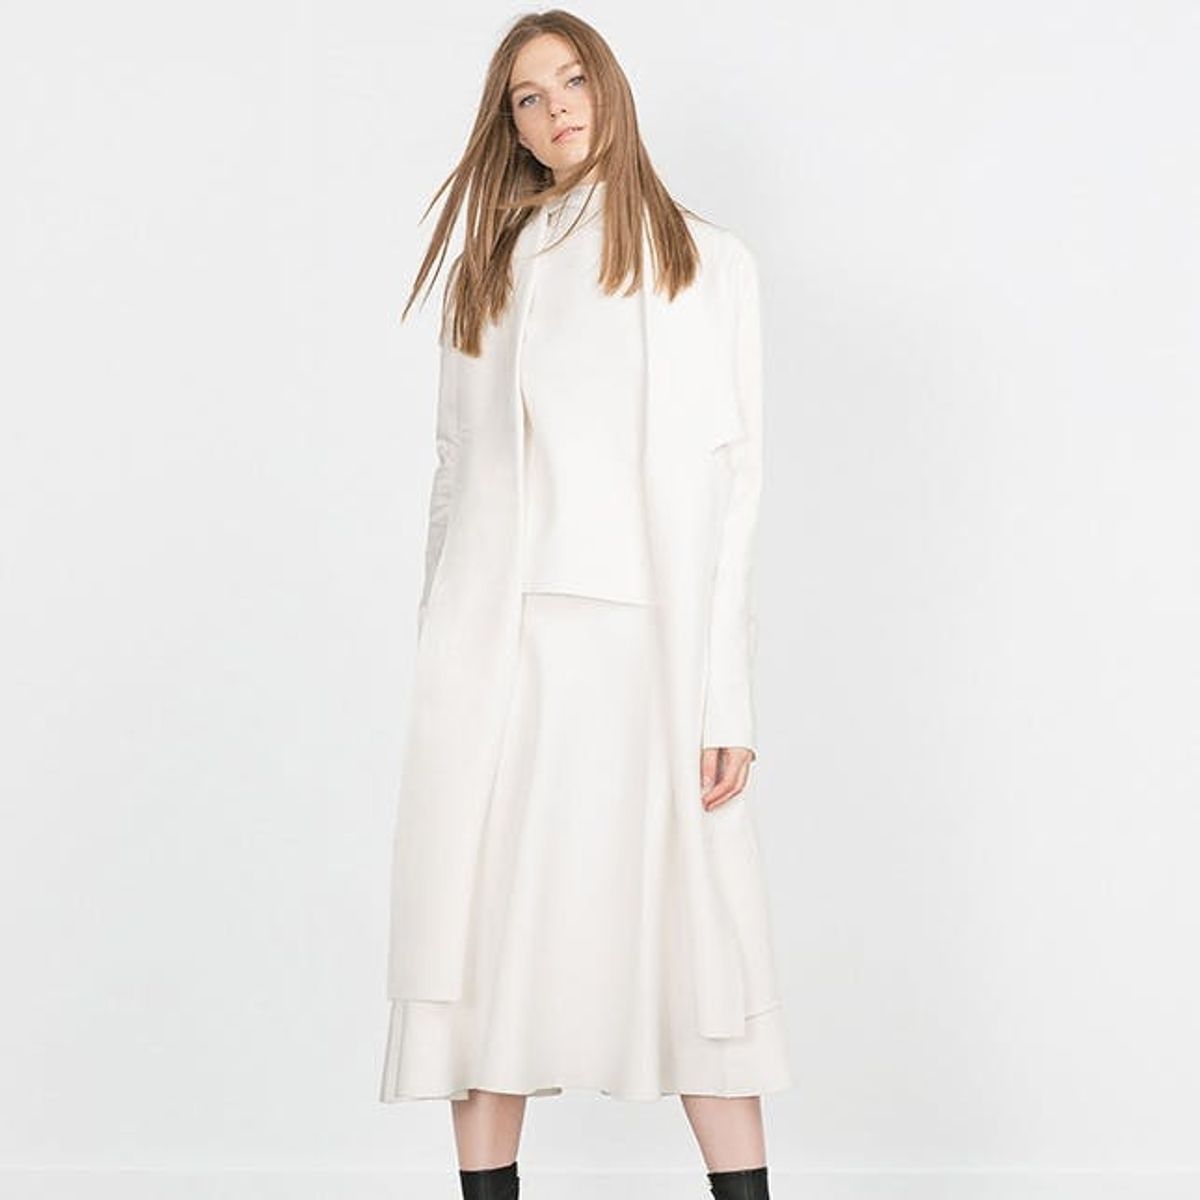 12 Winter White Staples That Look Super Classy